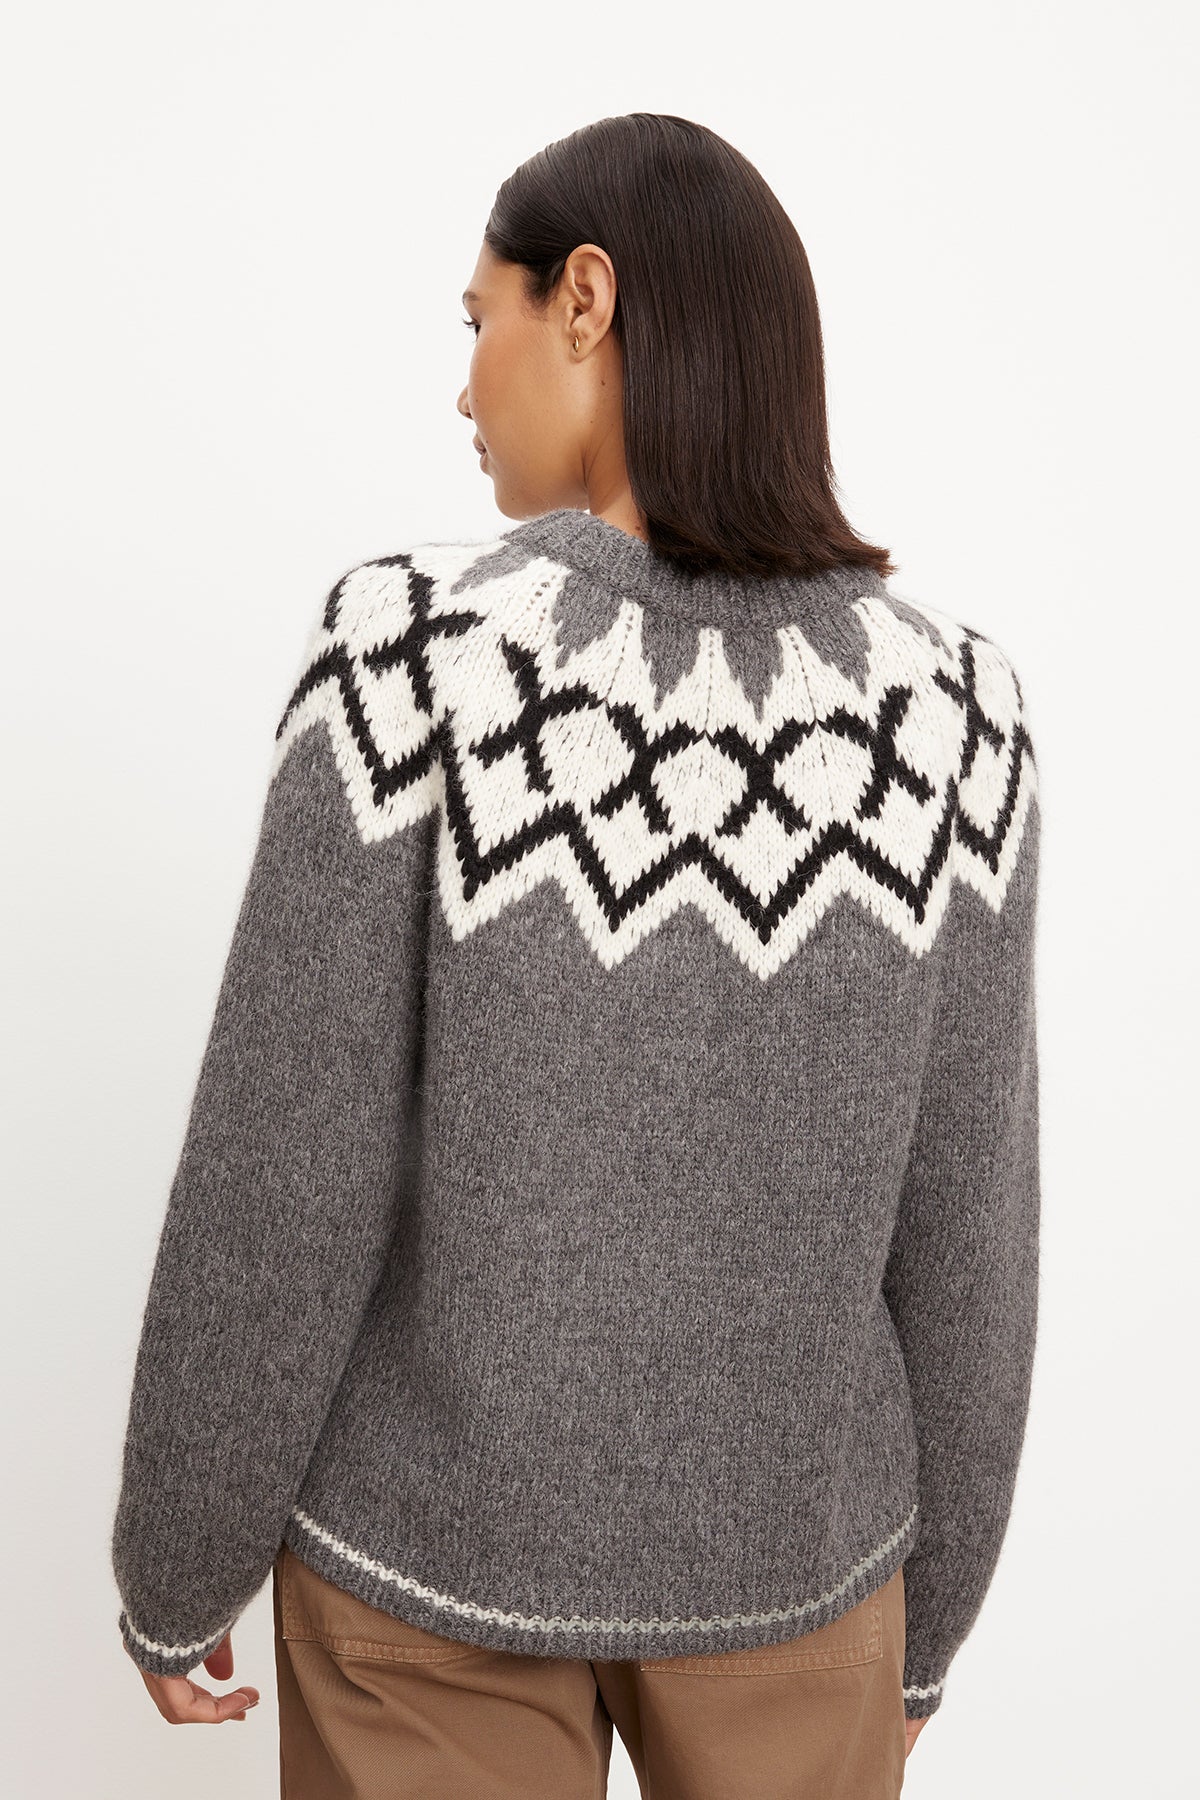 The back view of a woman wearing a Velvet by Graham & Spencer ALEXA FAIR ISLE CREW NECK SWEATER with a fair isle design.-35572030275777